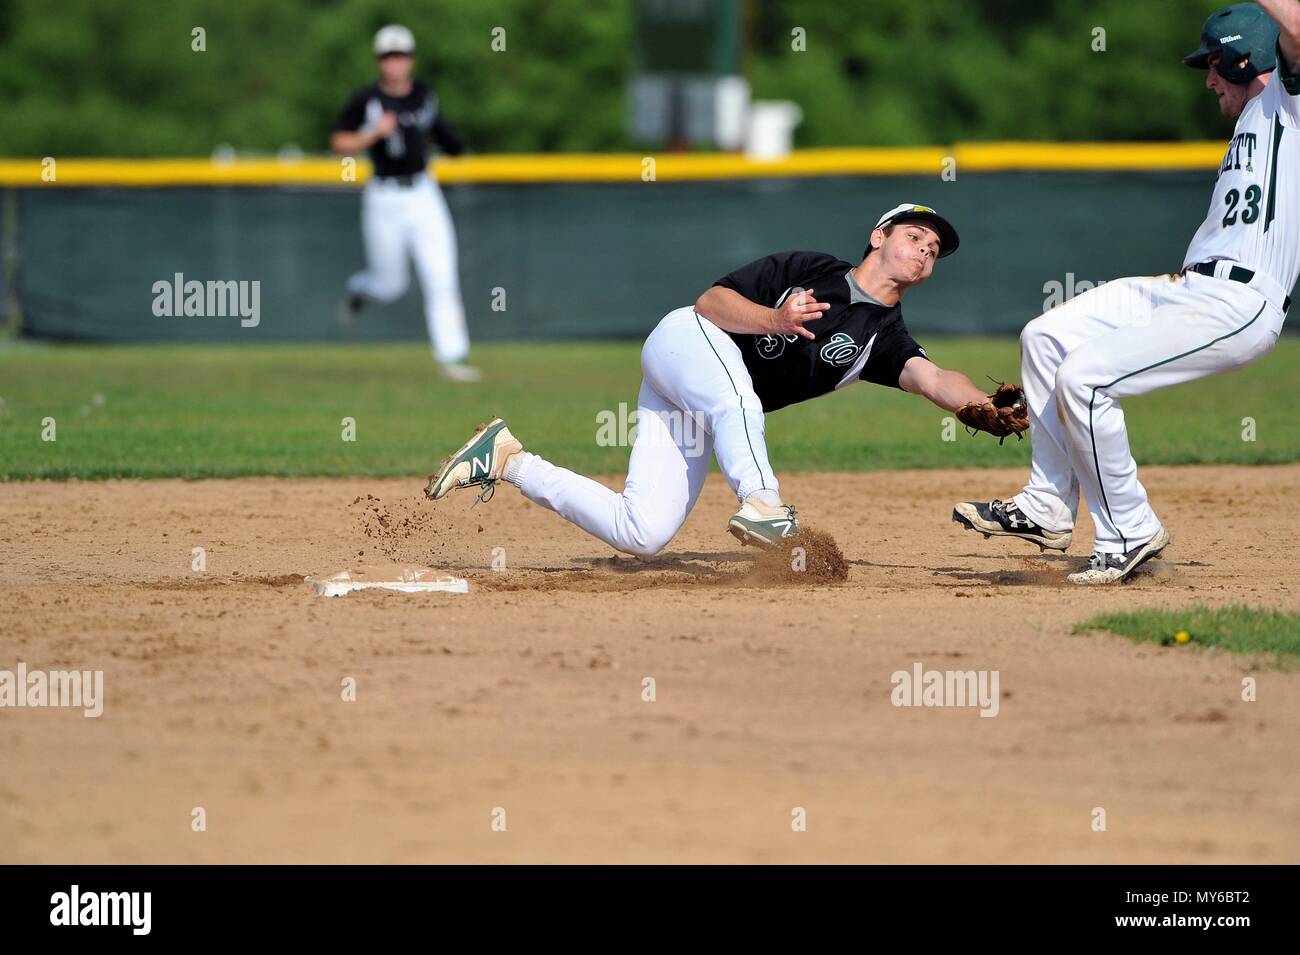 Middle infielder making a swipe tag on a runner attempting to so into second base with a double. USA Stock Photo